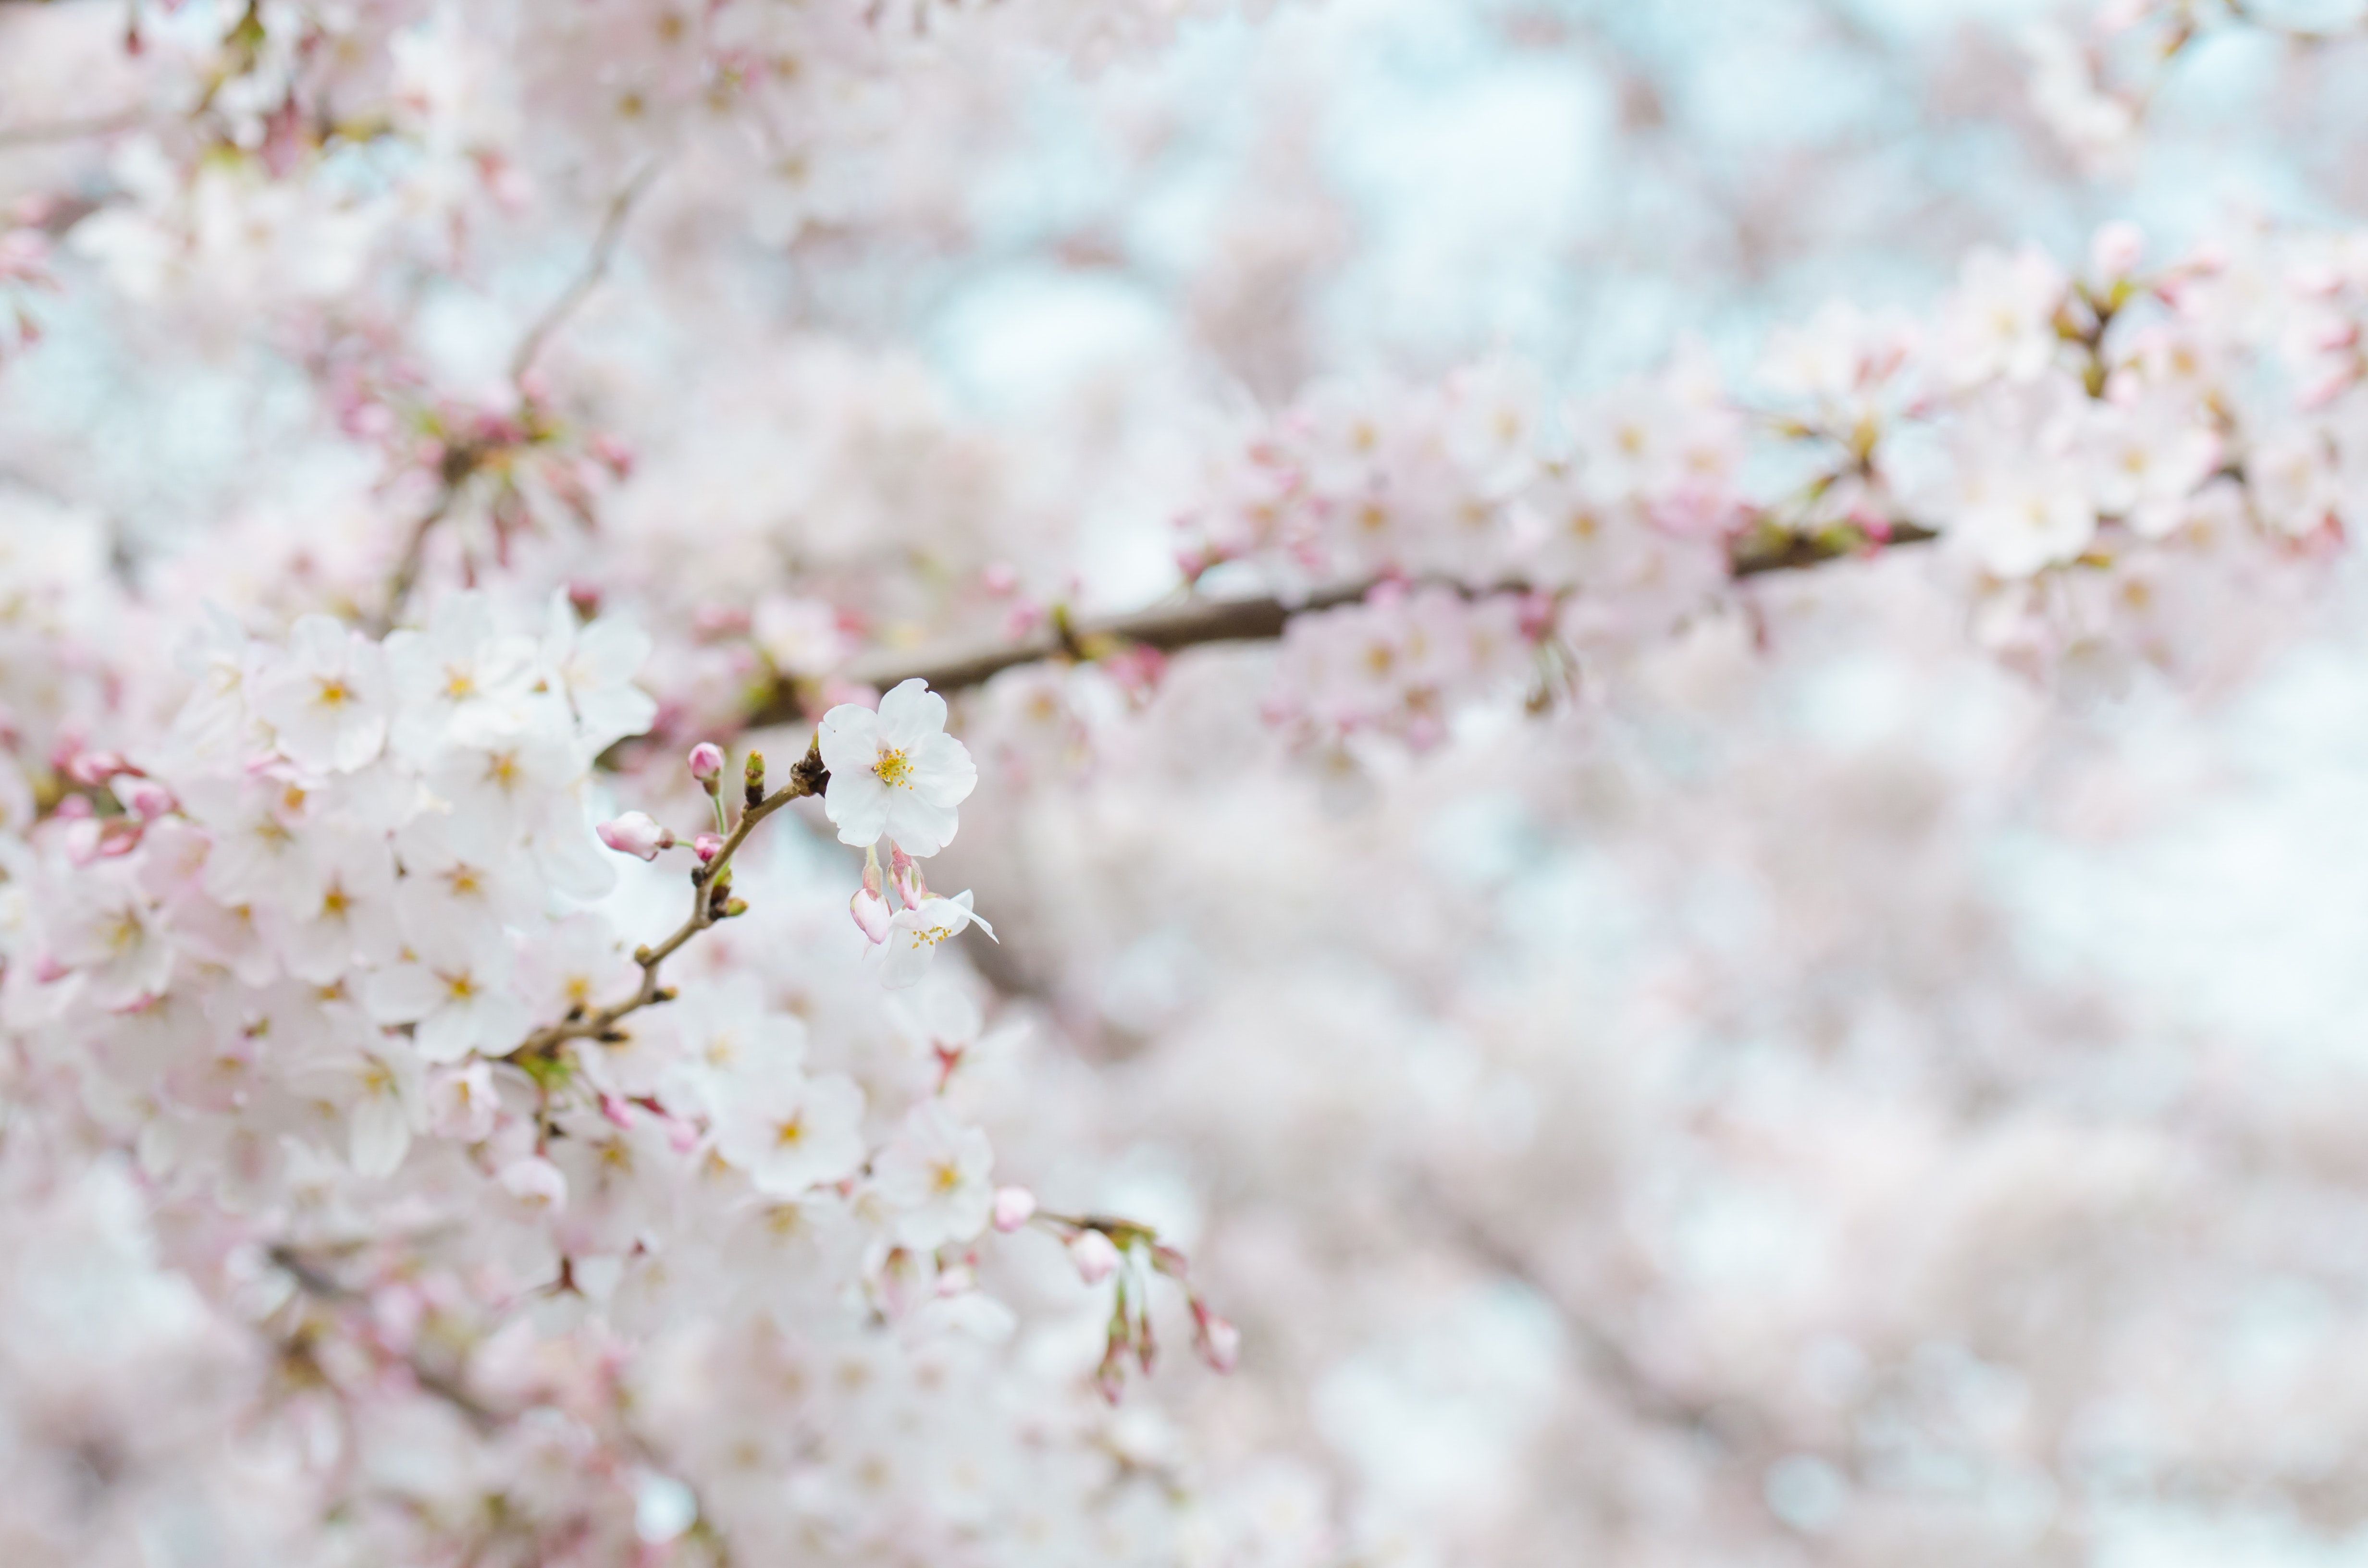 Nashville's Cherry Blossom Tree Controversy is Part of a Bigger